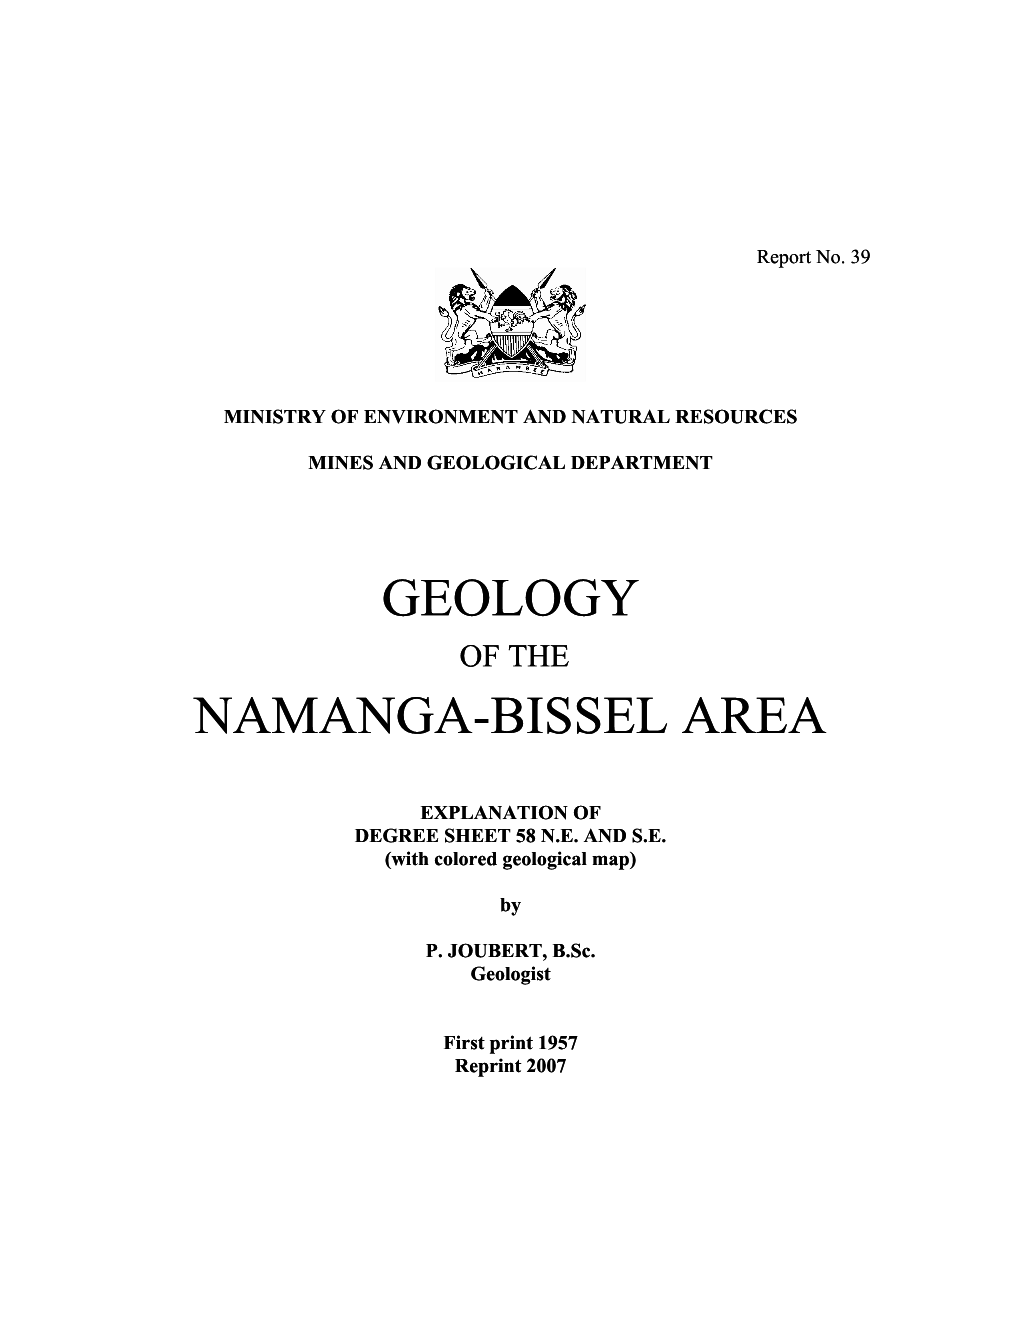 Geology of the Namanga-Bissel Area